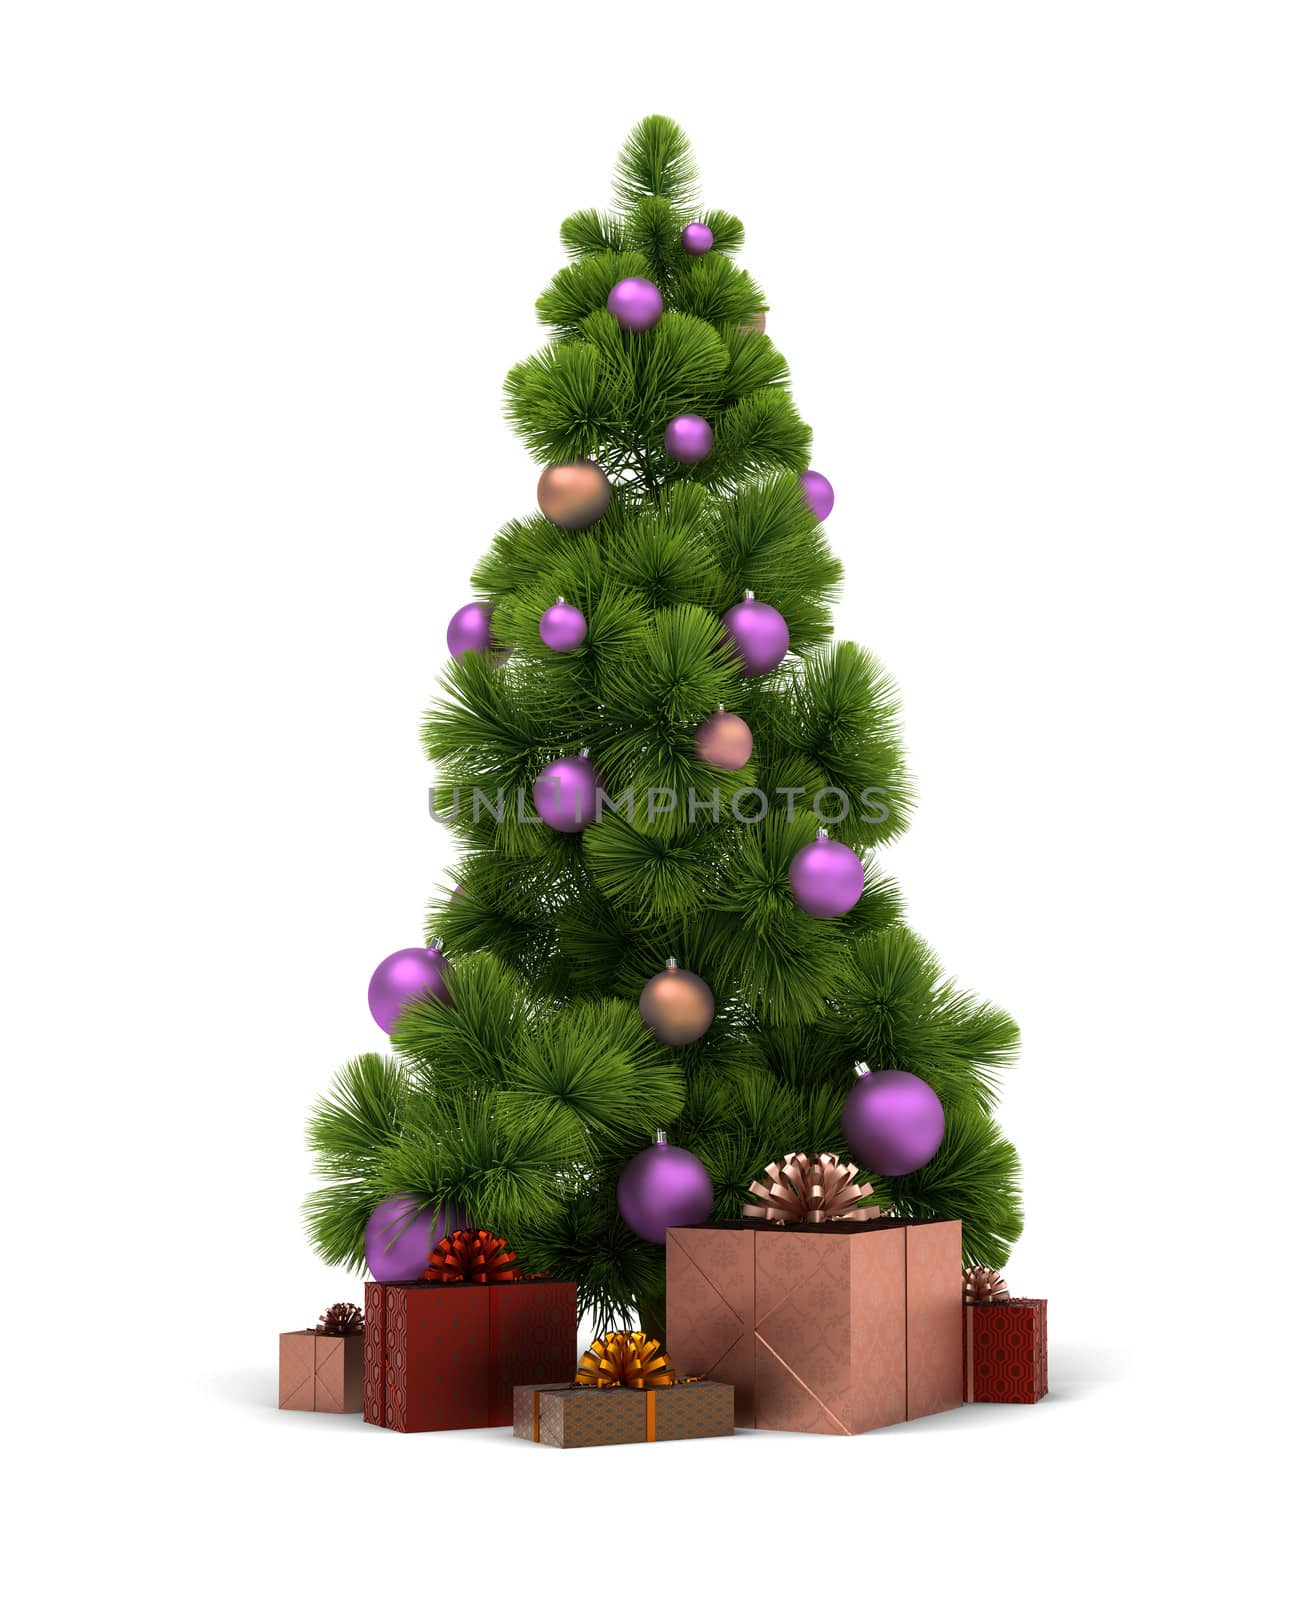 Christmas tree and gifts. 3d image. Isolated white background. Clipping path included.